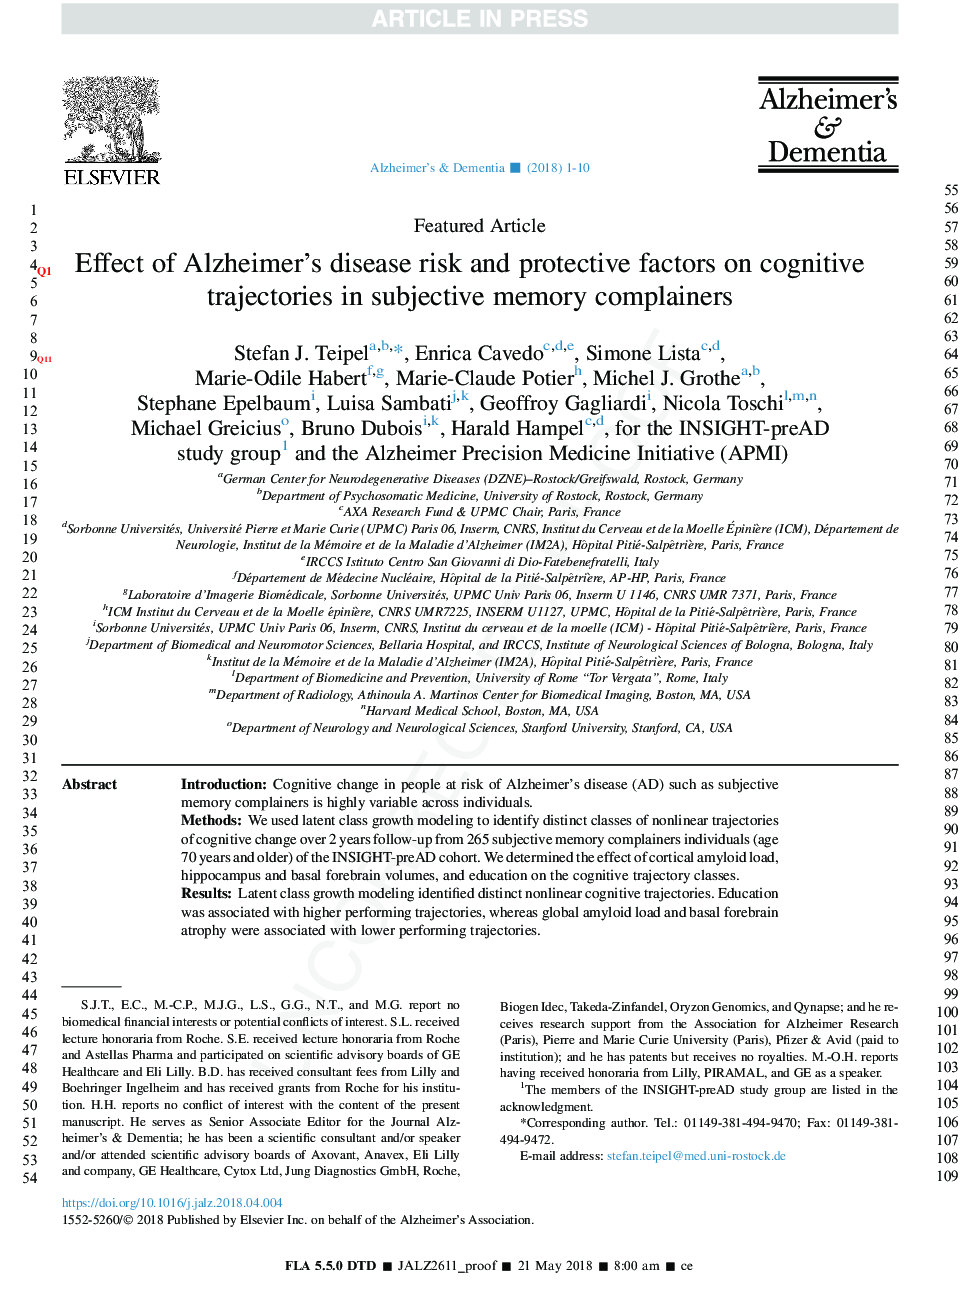 Effect of Alzheimer's disease risk and protective factors on cognitive trajectories in subjective memory complainers: An INSIGHT-preAD study